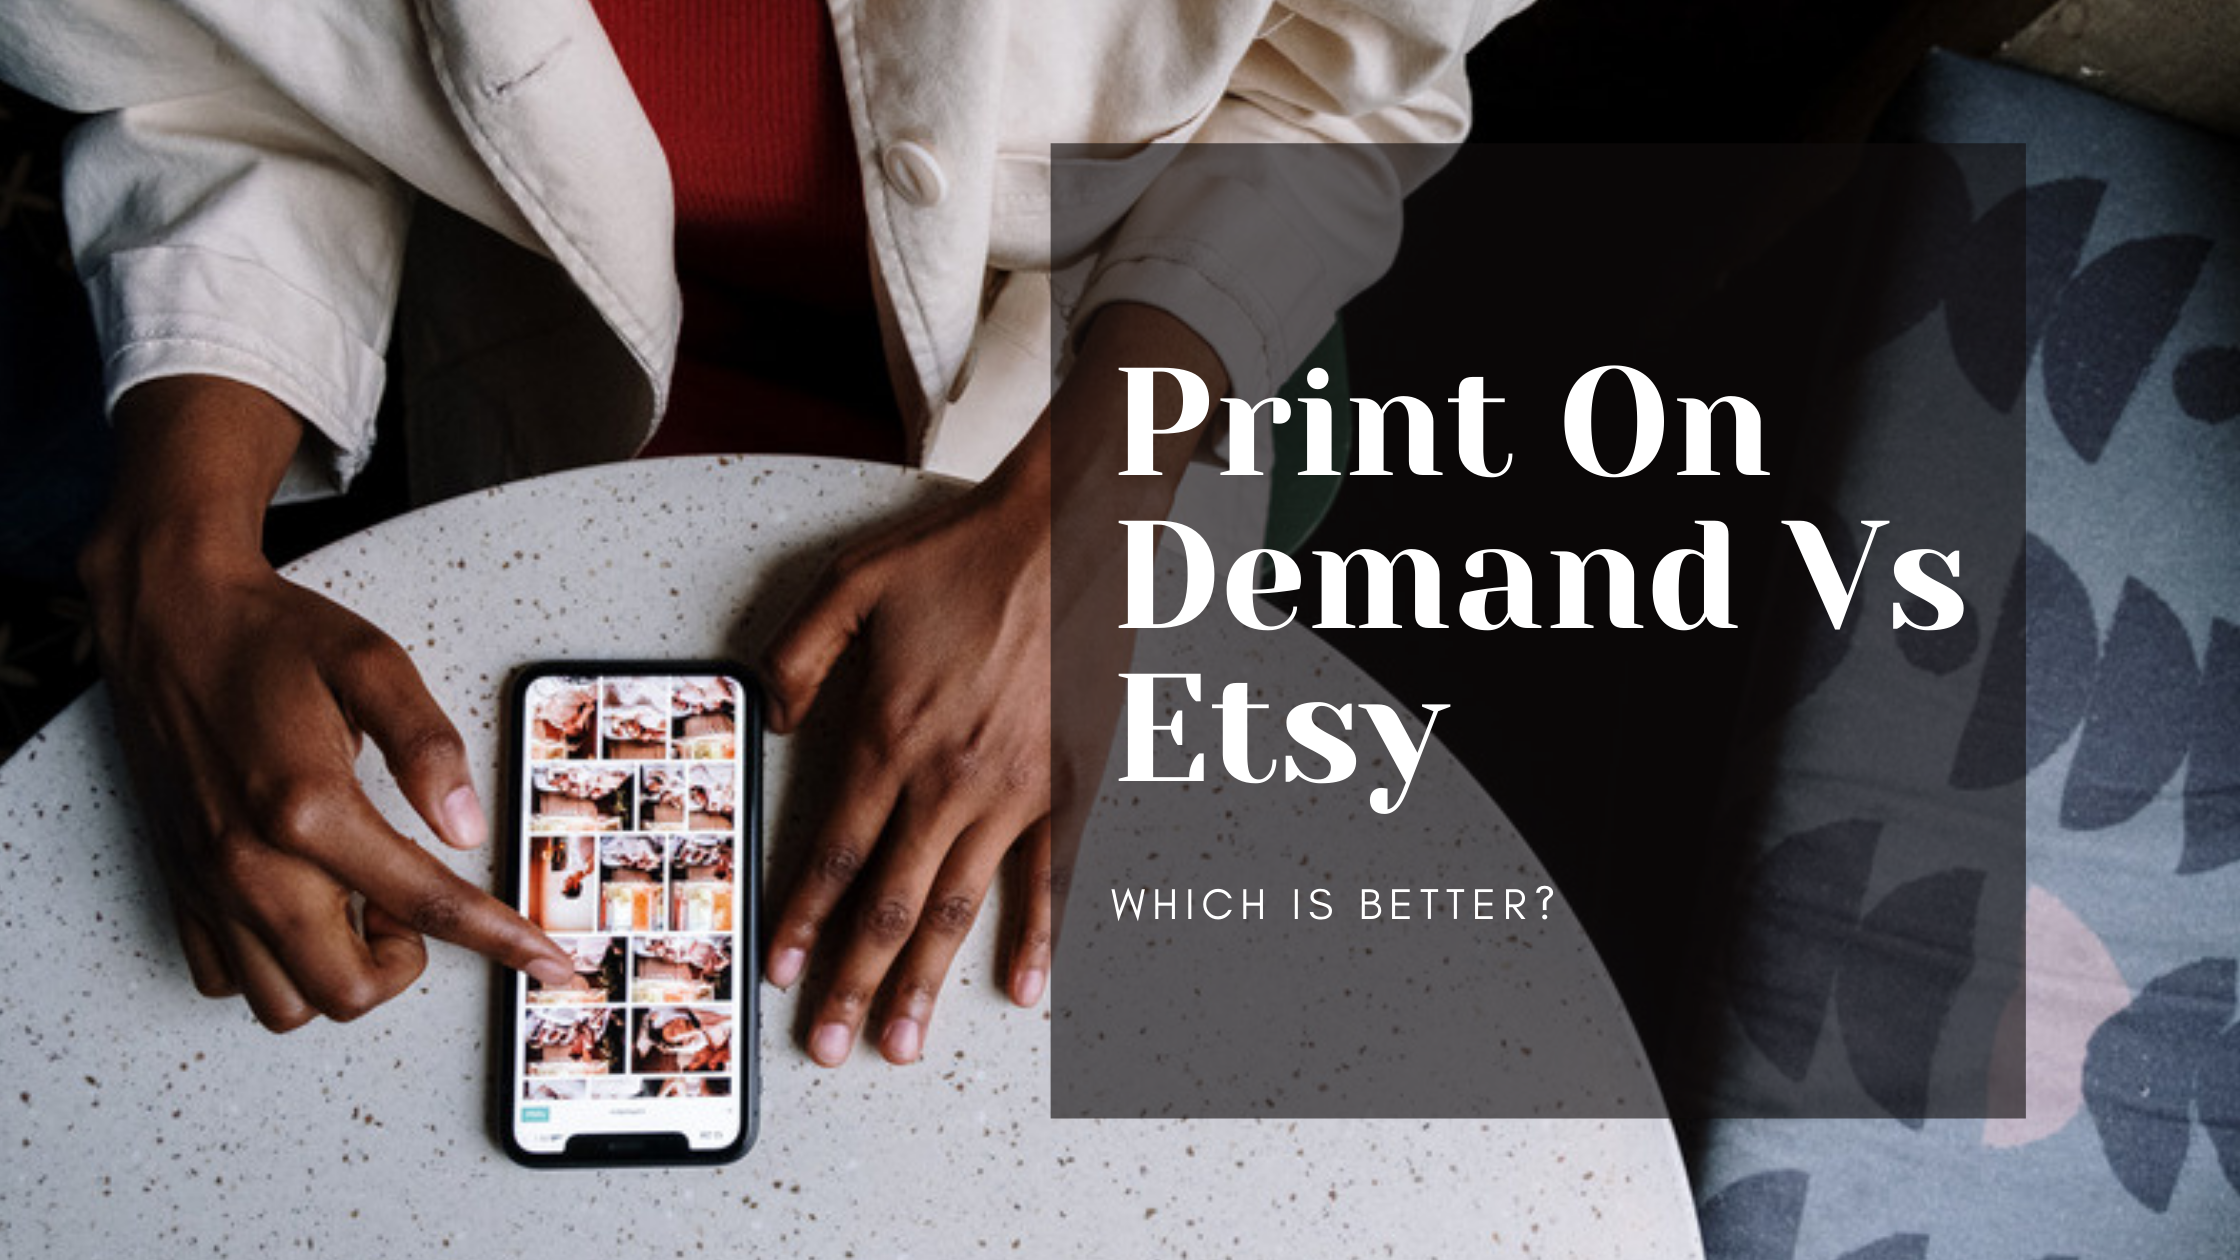 Etsy or Print On Demand: Which is Better?